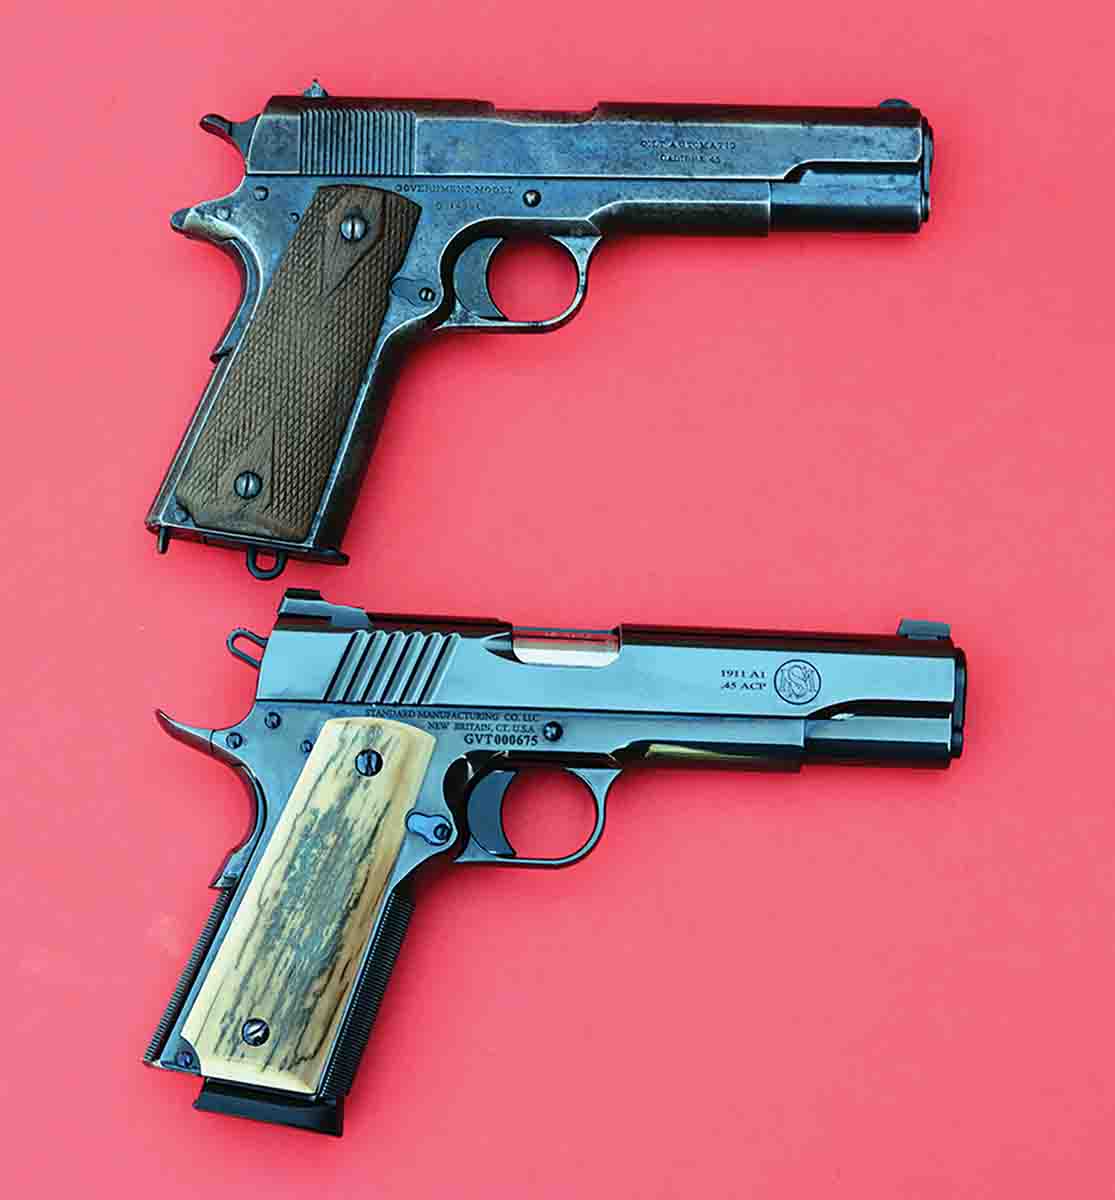 The Standard Manufacturing Model 1911 (bottom) is an advanced version of Colt’s original Model 1911 (top), with this commercial sample being manufactured in 1914.